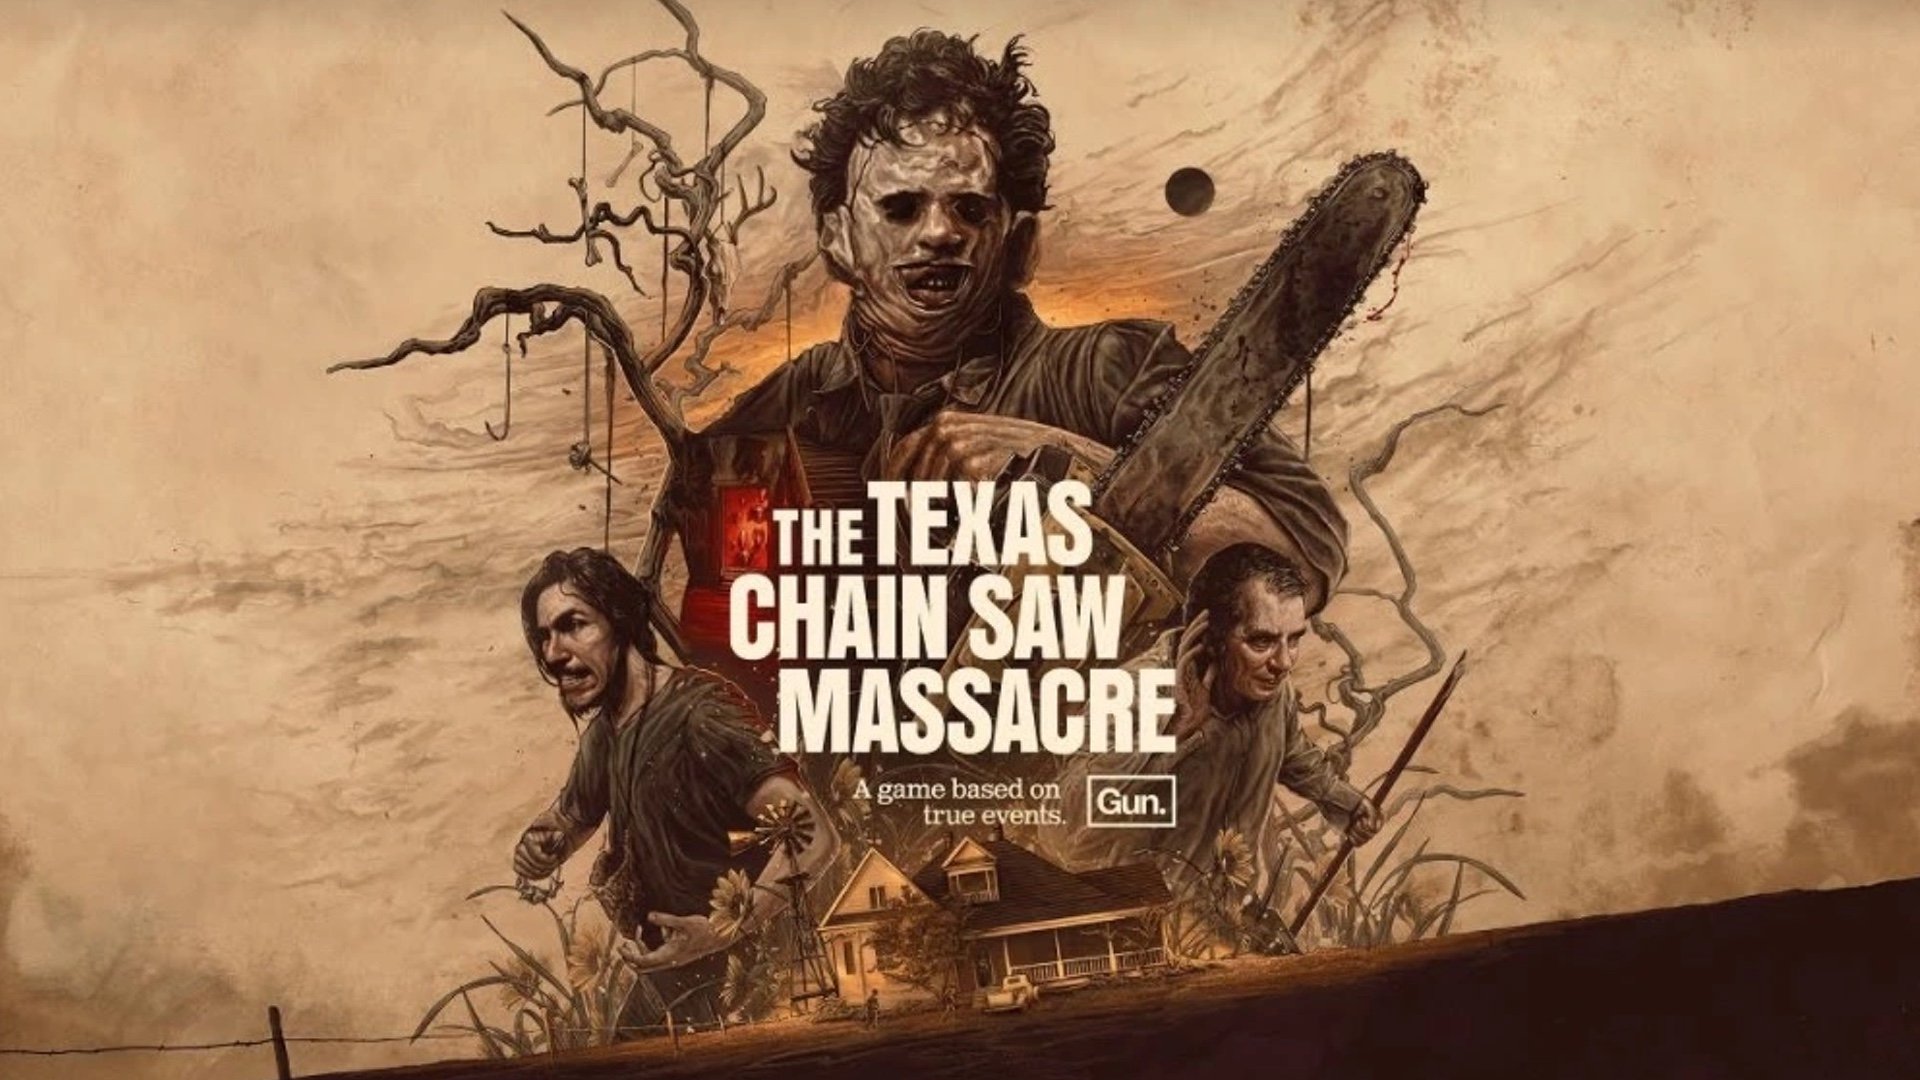 Teaser Trailer For A The Texas Chainsaw Massacre Video Game With